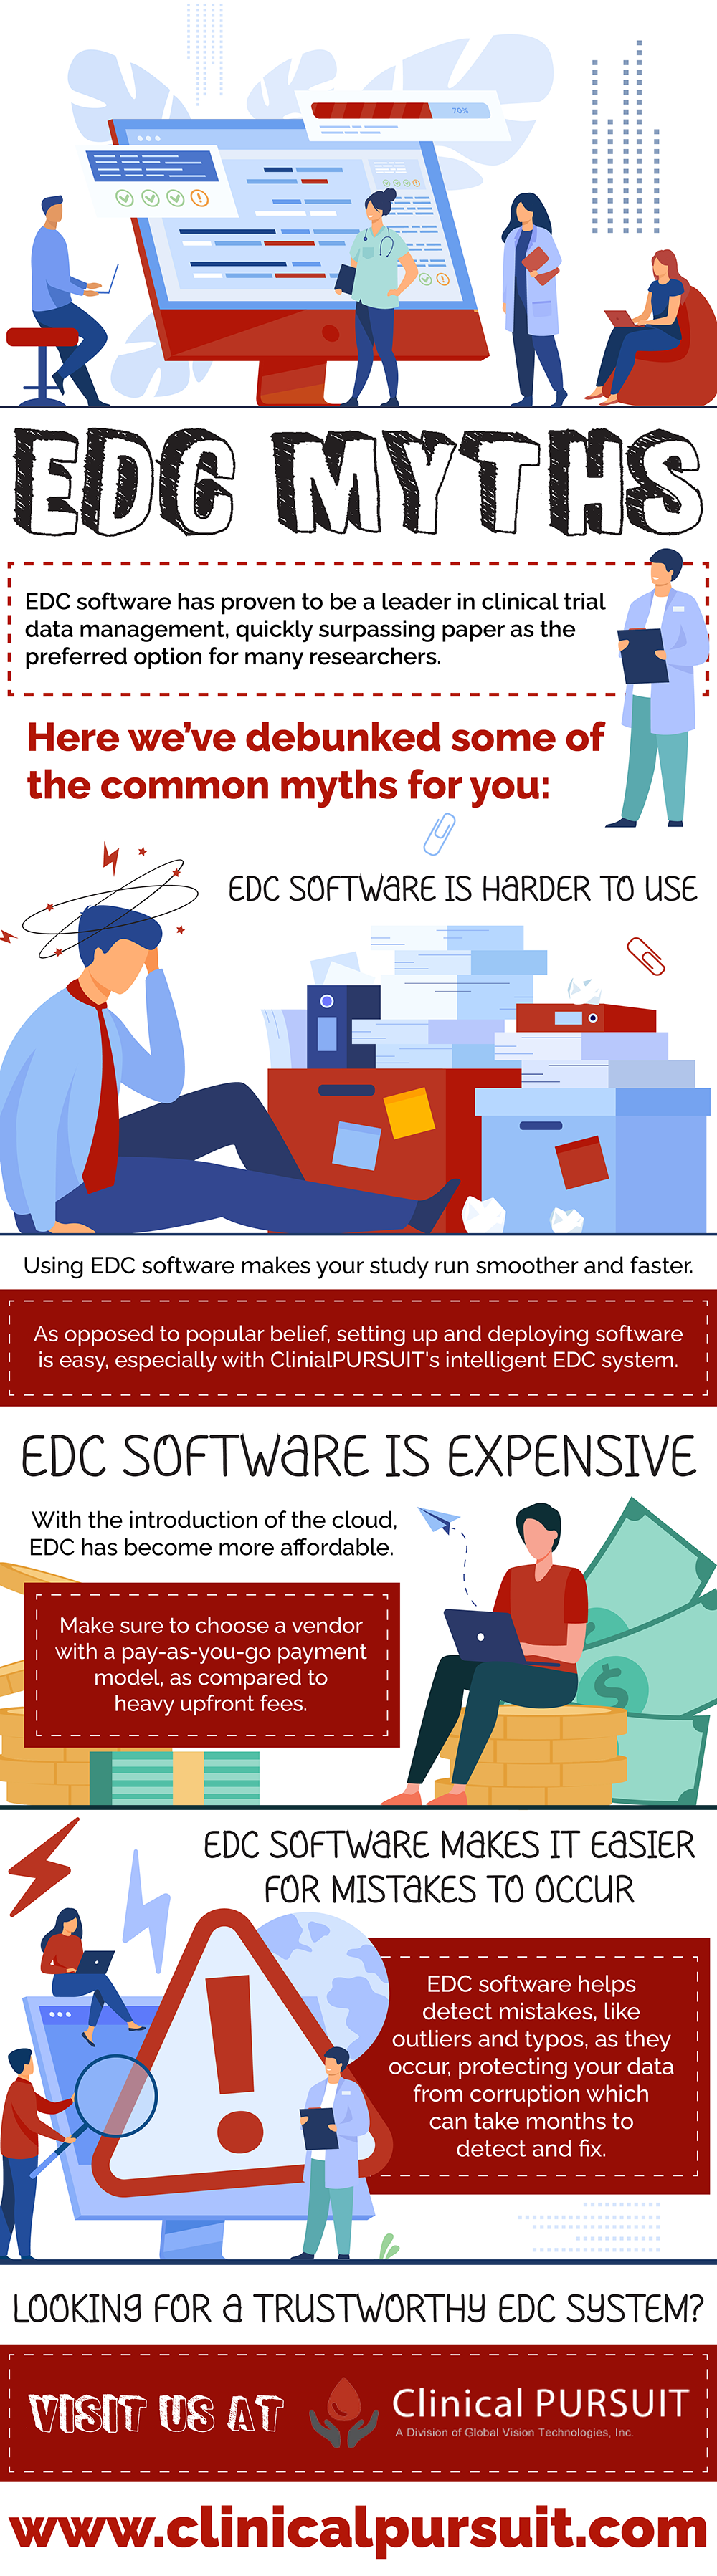 Infographic Illustrating Clinical Electronic Data Capture Myths